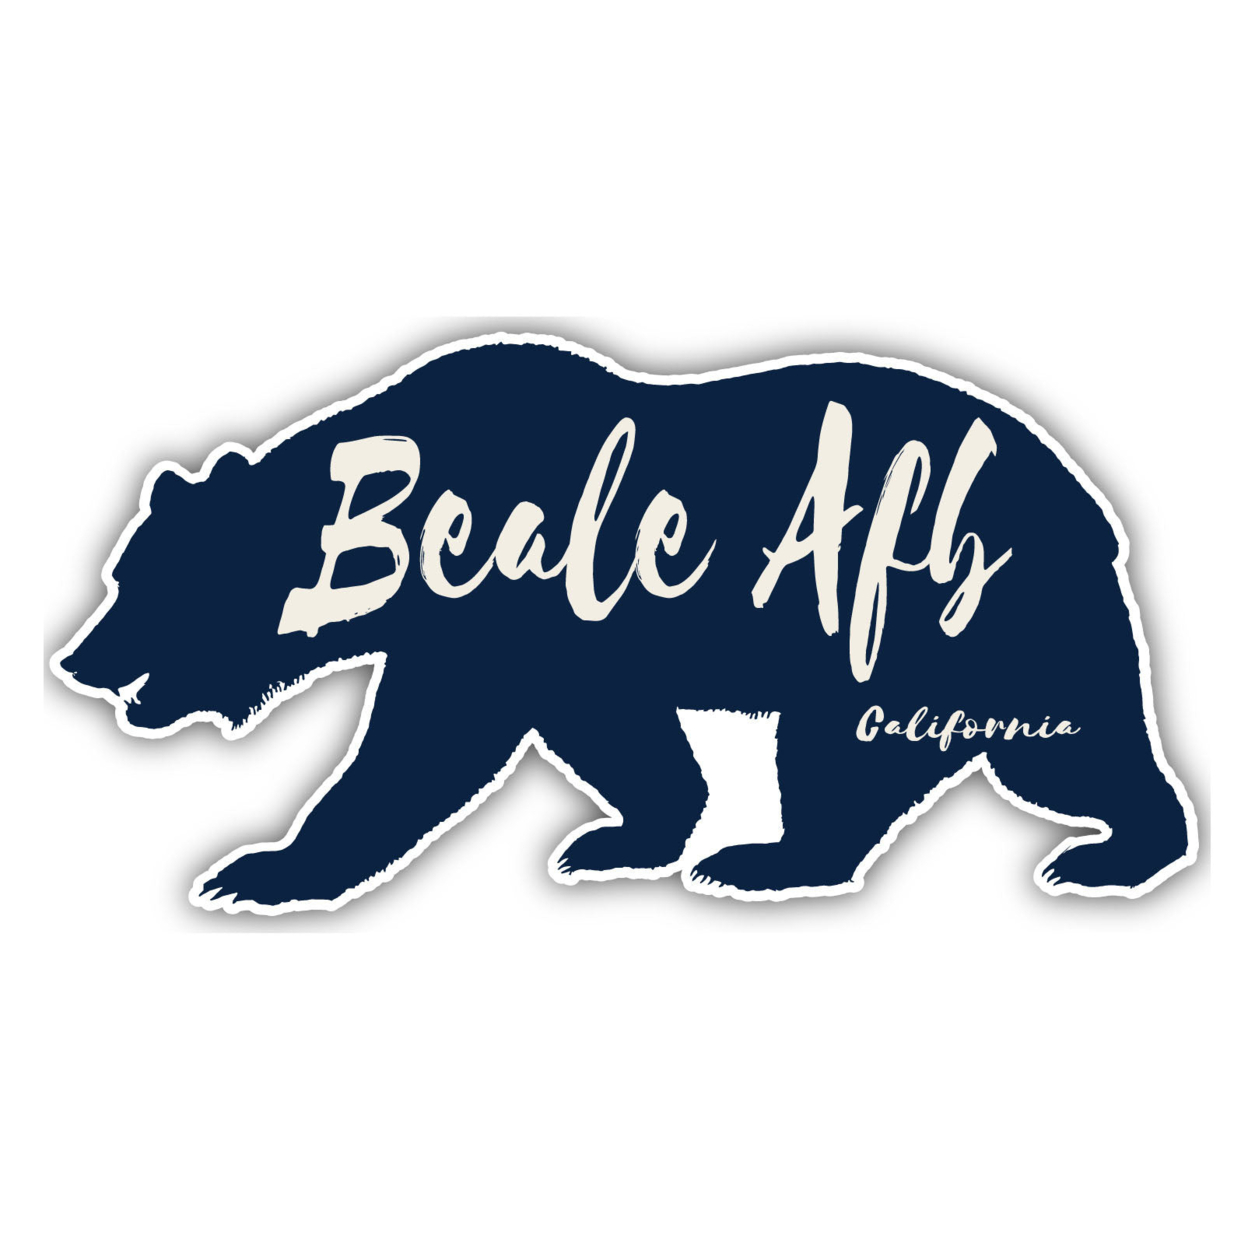 Beale AFB California Souvenir Decorative Stickers (Choose Theme And Size) - 4-Pack, 6-Inch, Bear